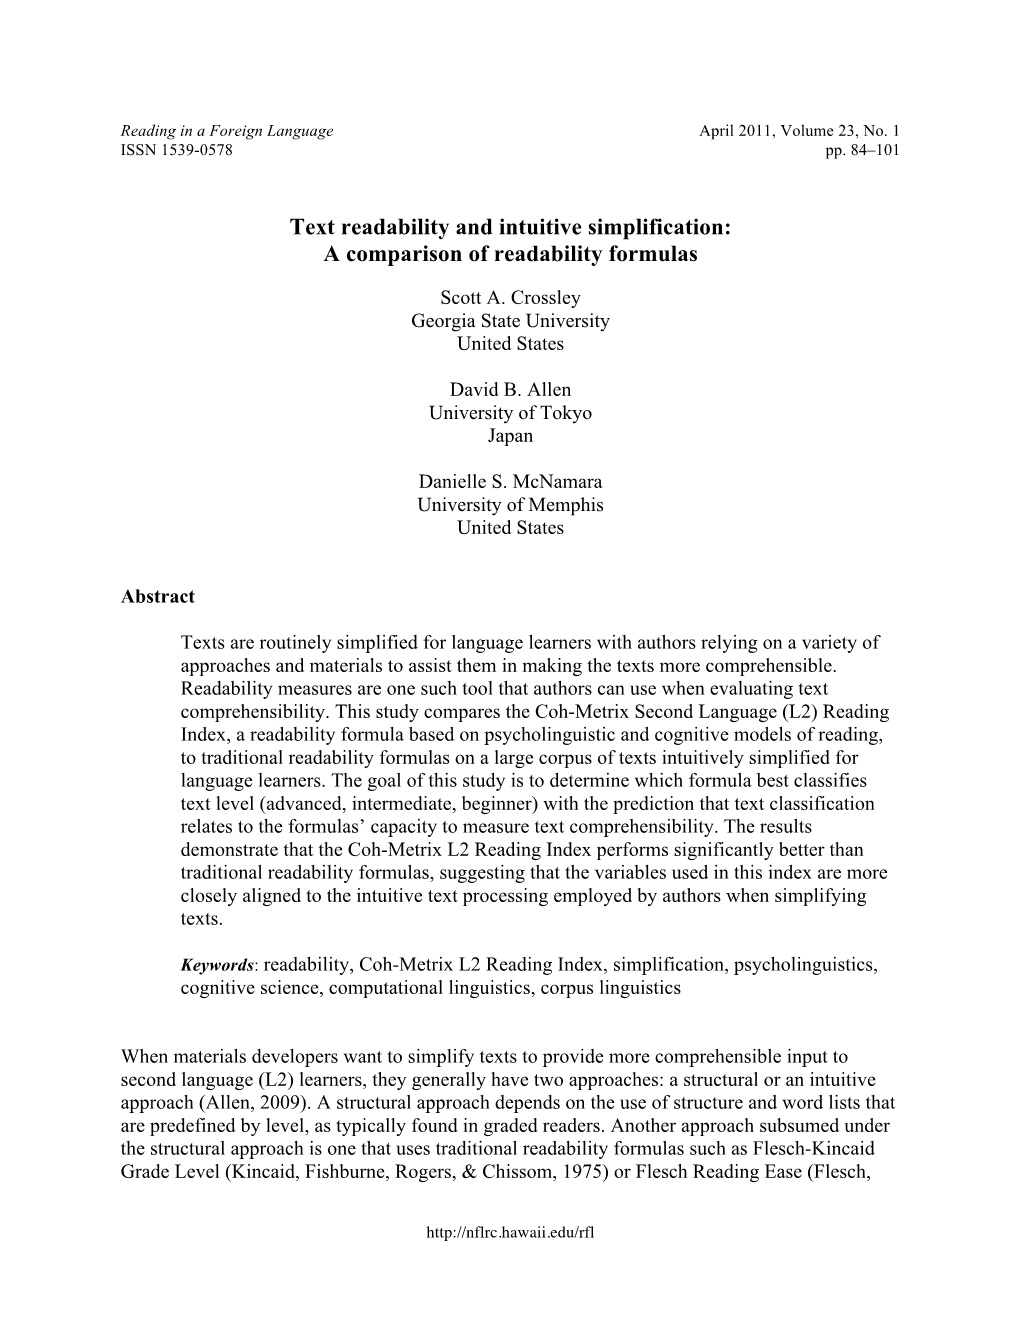 Text Readability and Intuitive Simplification: a Comparison of Readability Formulas